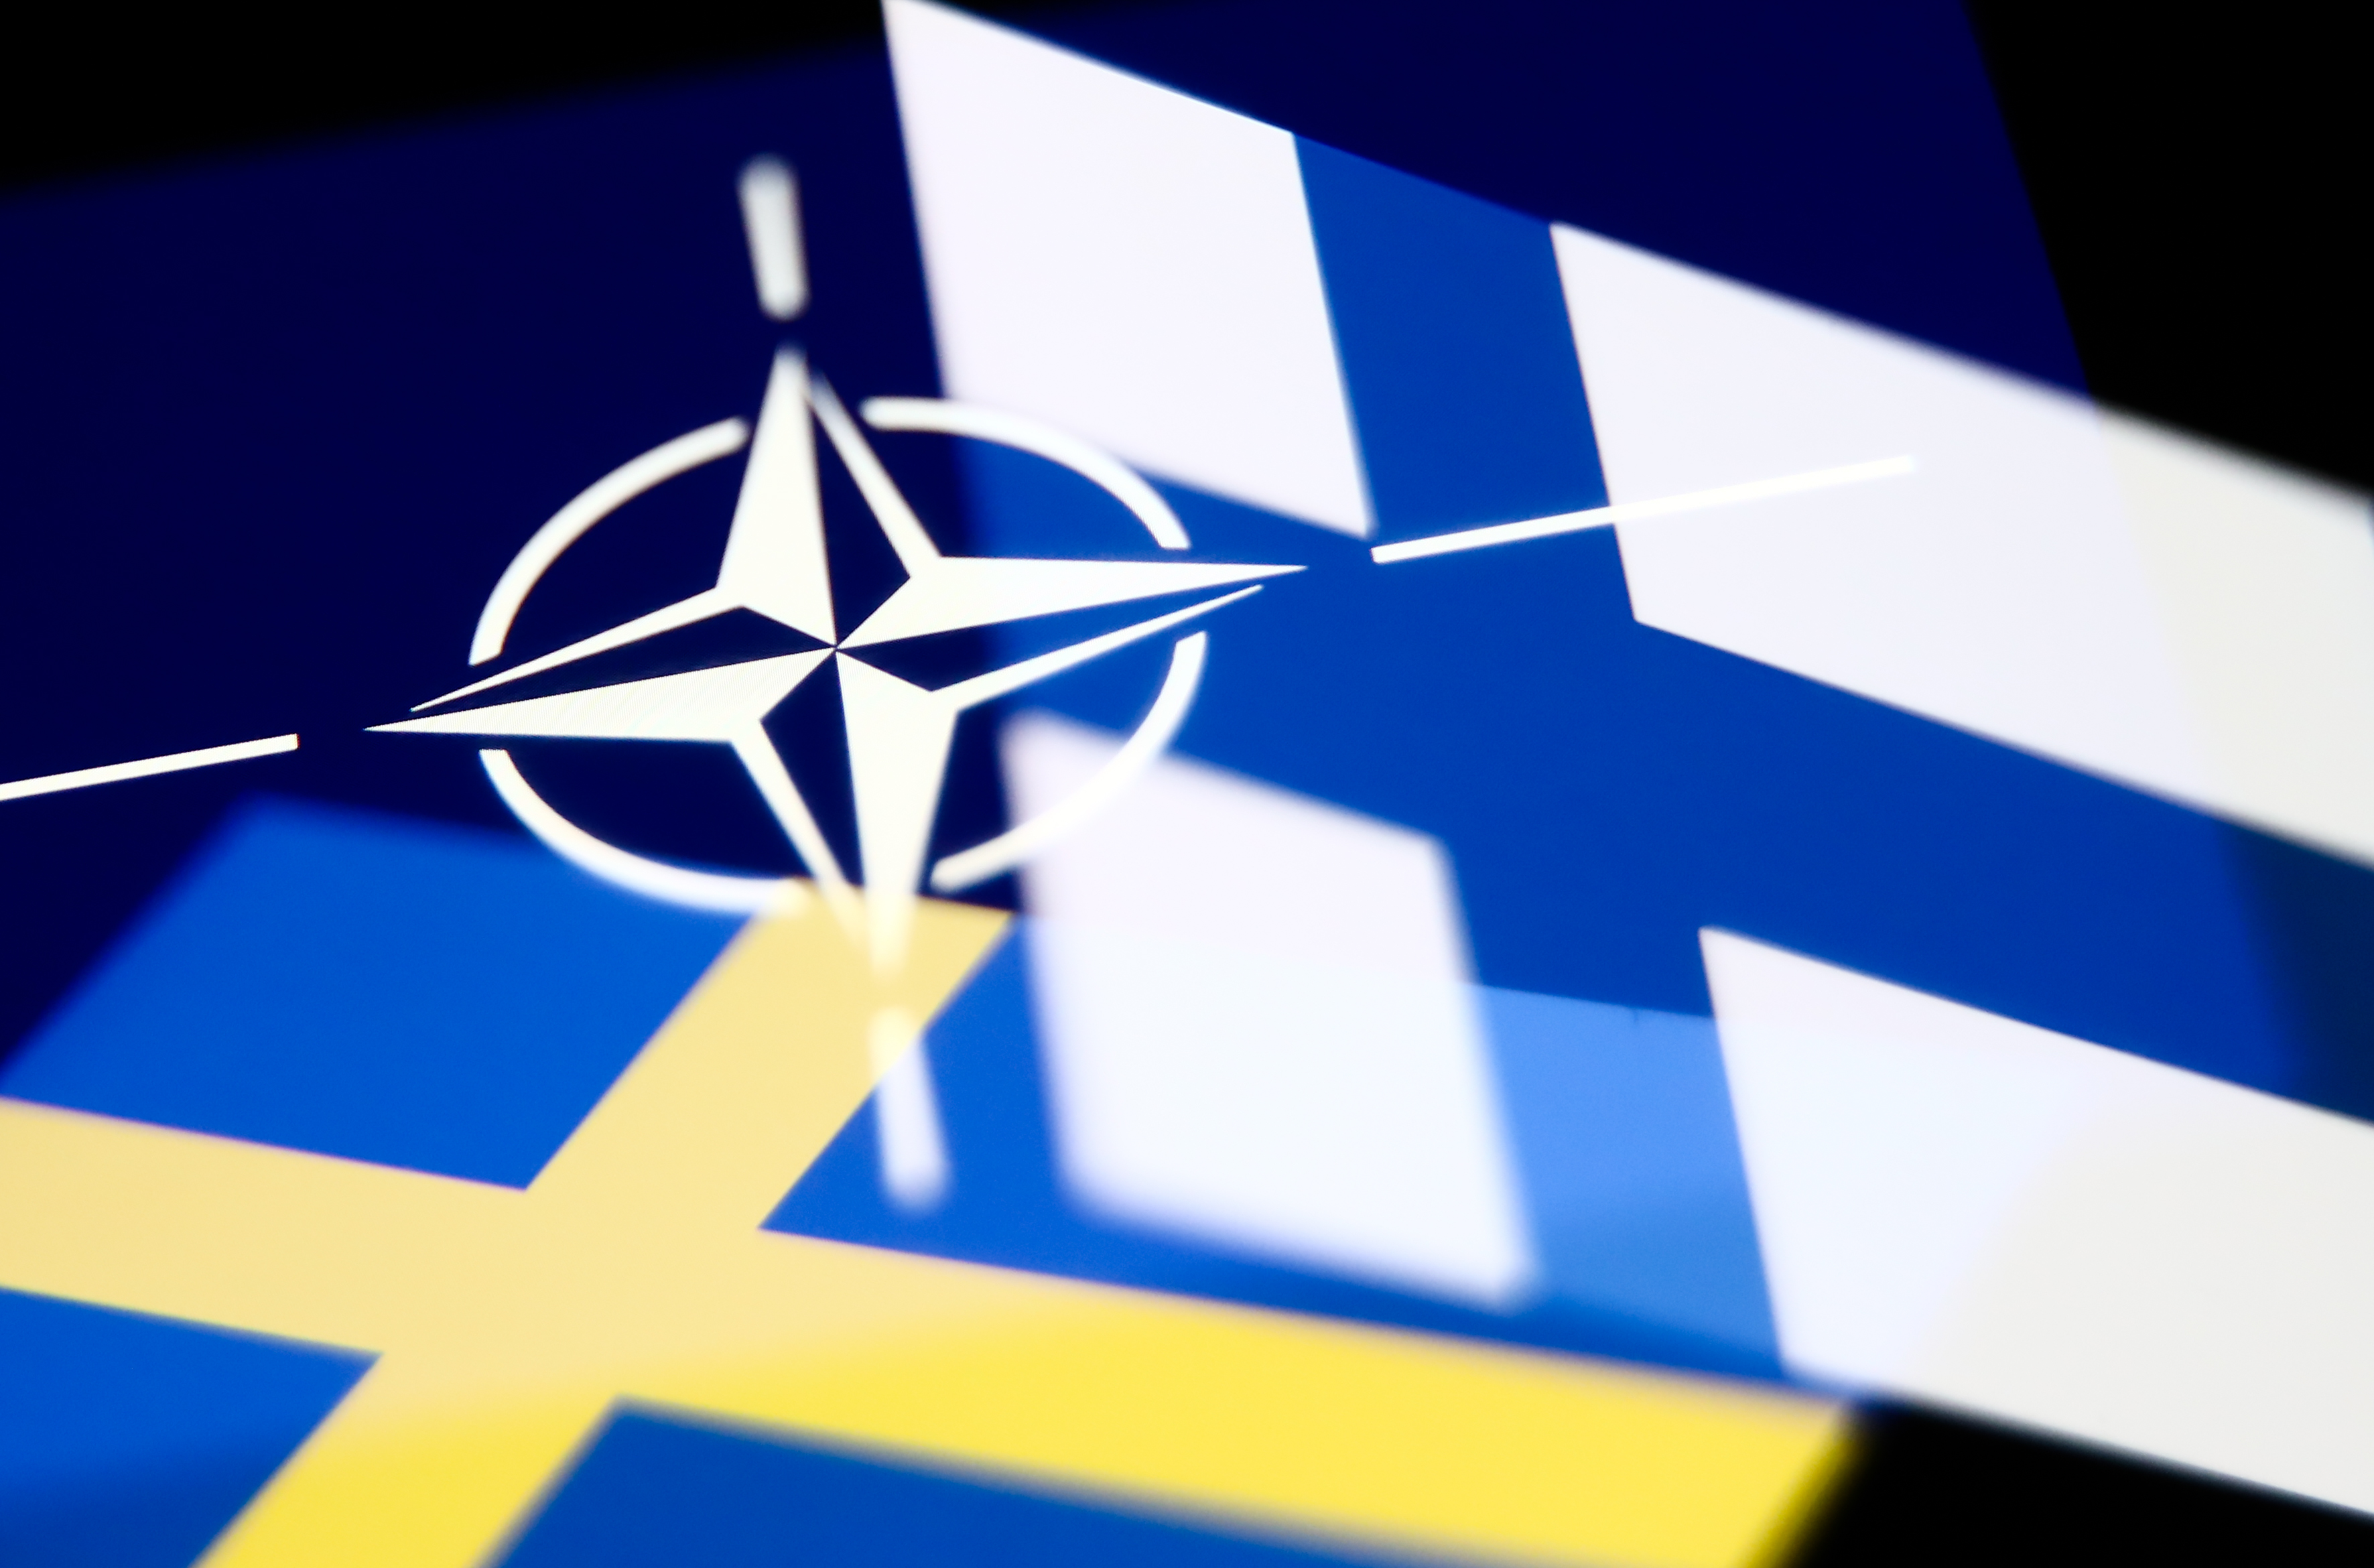 Can Turkey stop Finland, Sweden from joining NATO? Why it's seeking 'bargains' - National | Globalnews.ca